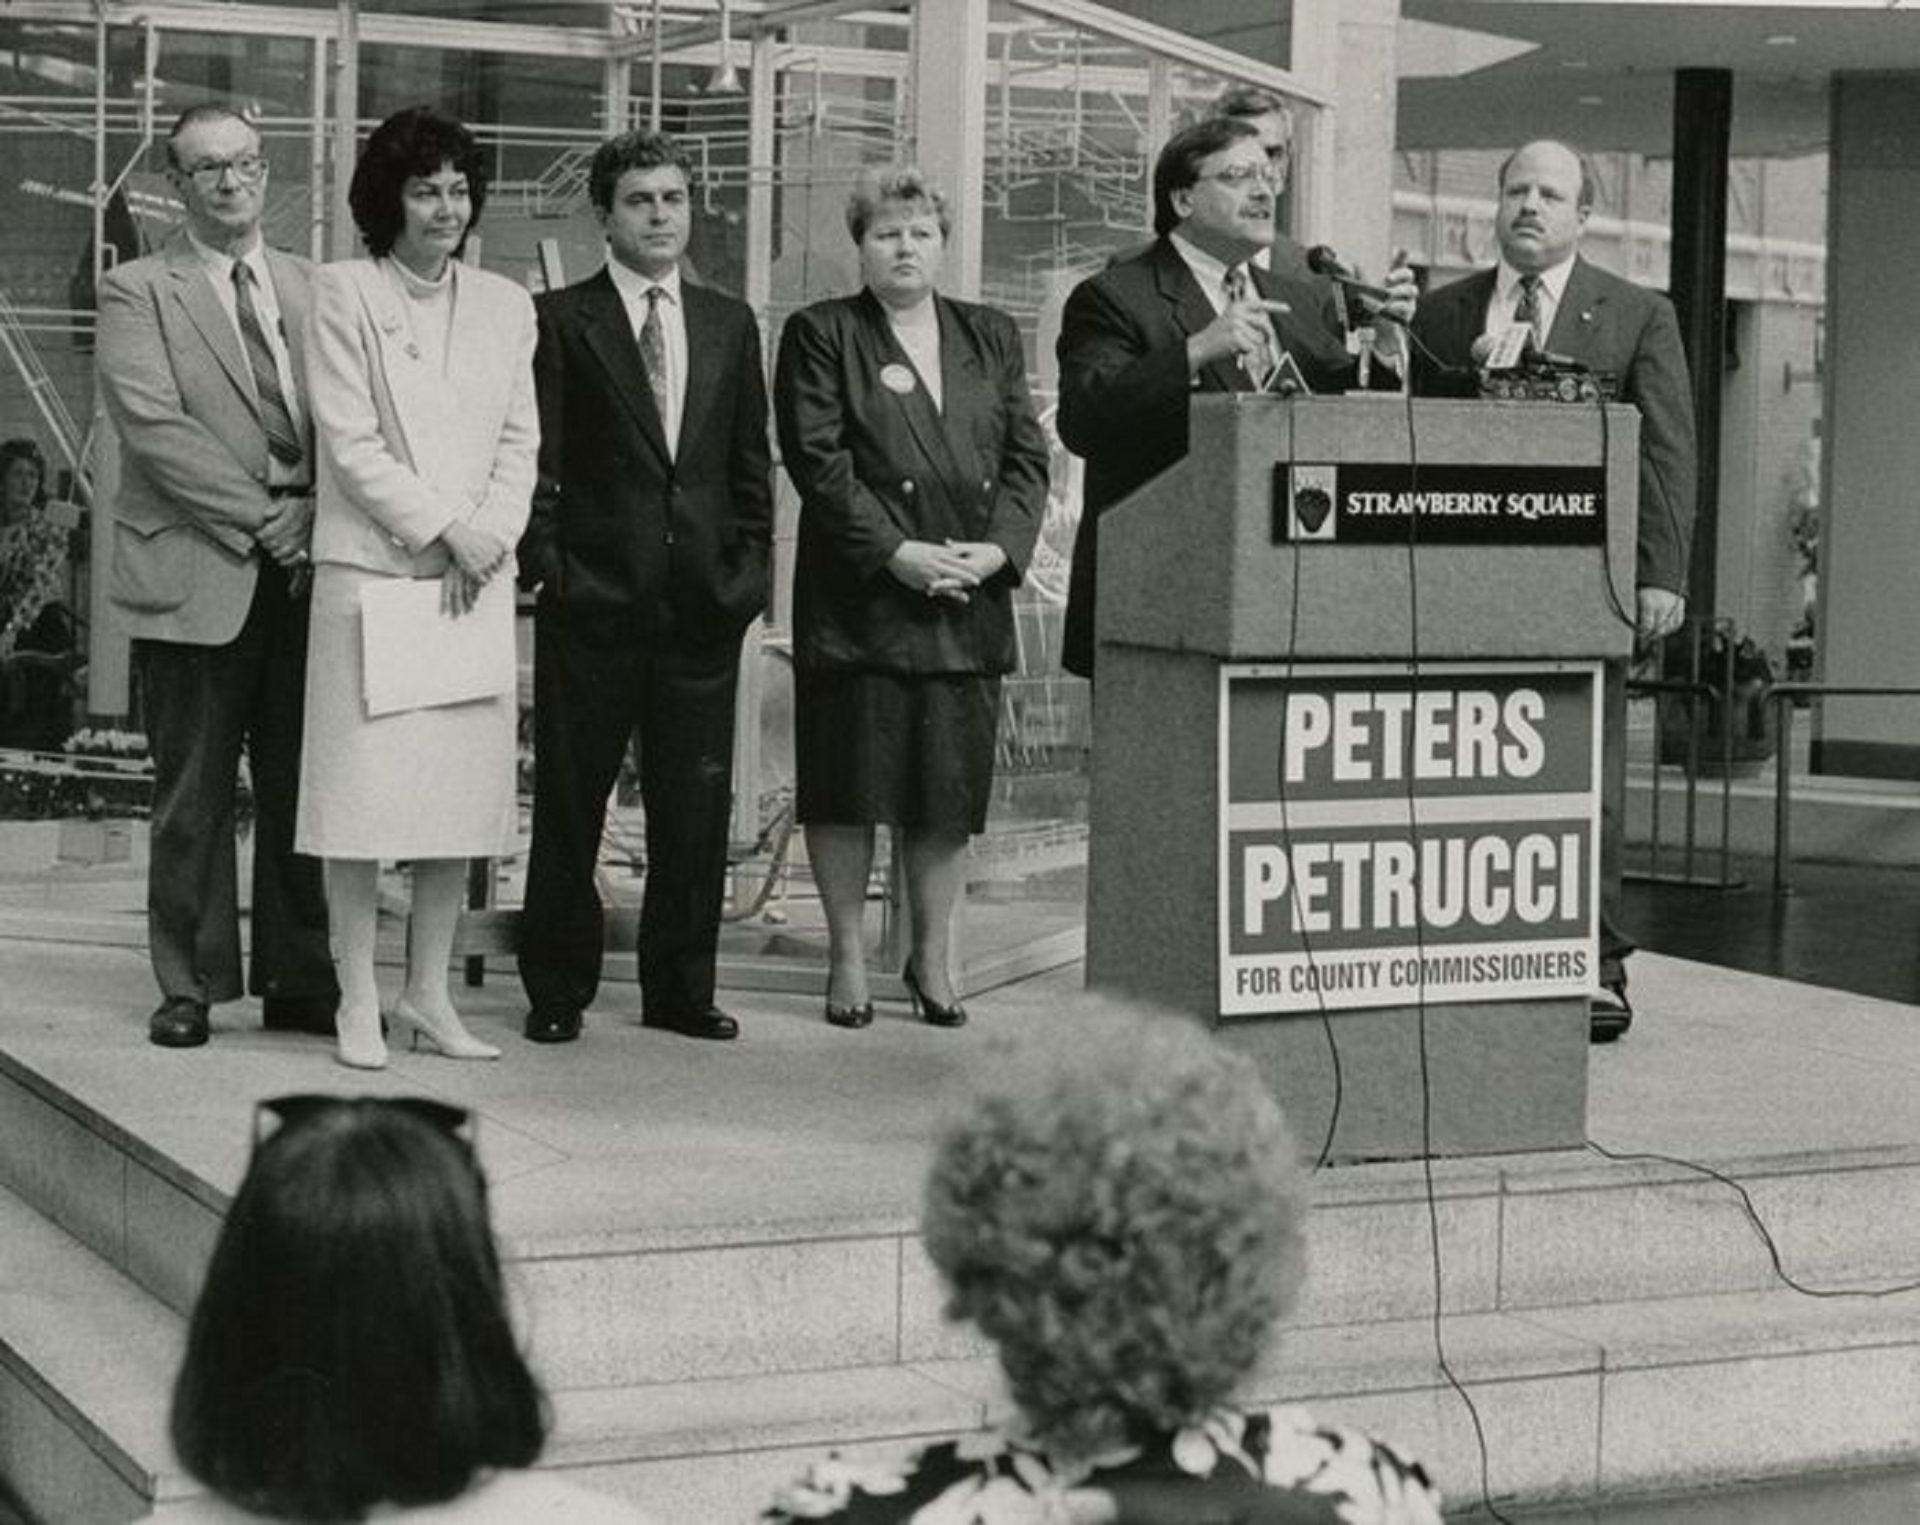 Mayor Reed speaks at a press conference about Dauphin County Democratic Party unity in Strawberry Square, October 1991.